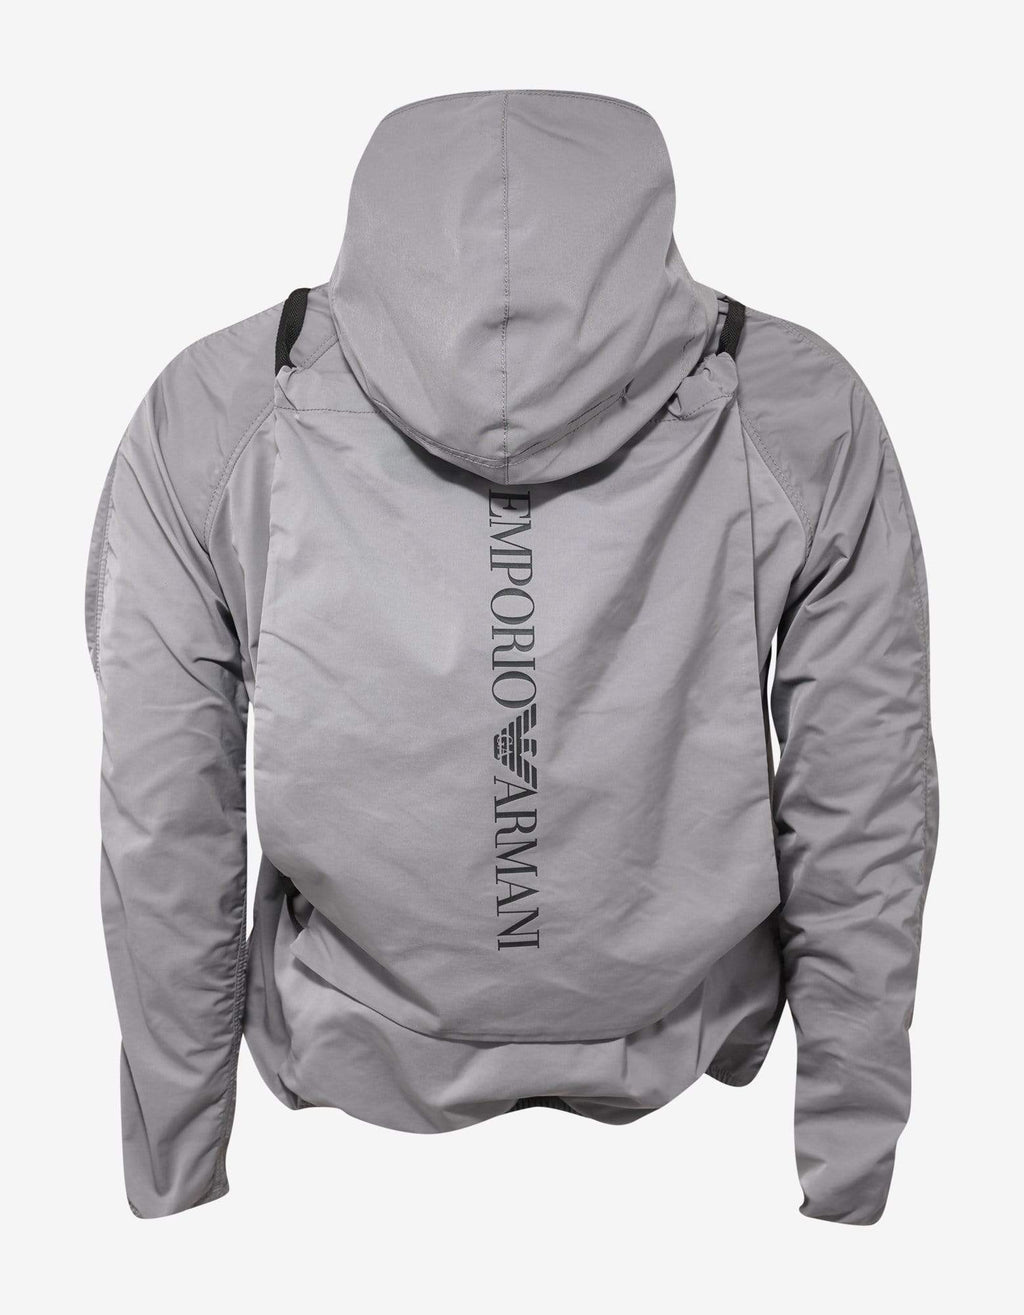 Emporio Armani Grey Hooded Jacket with Bag Attachment